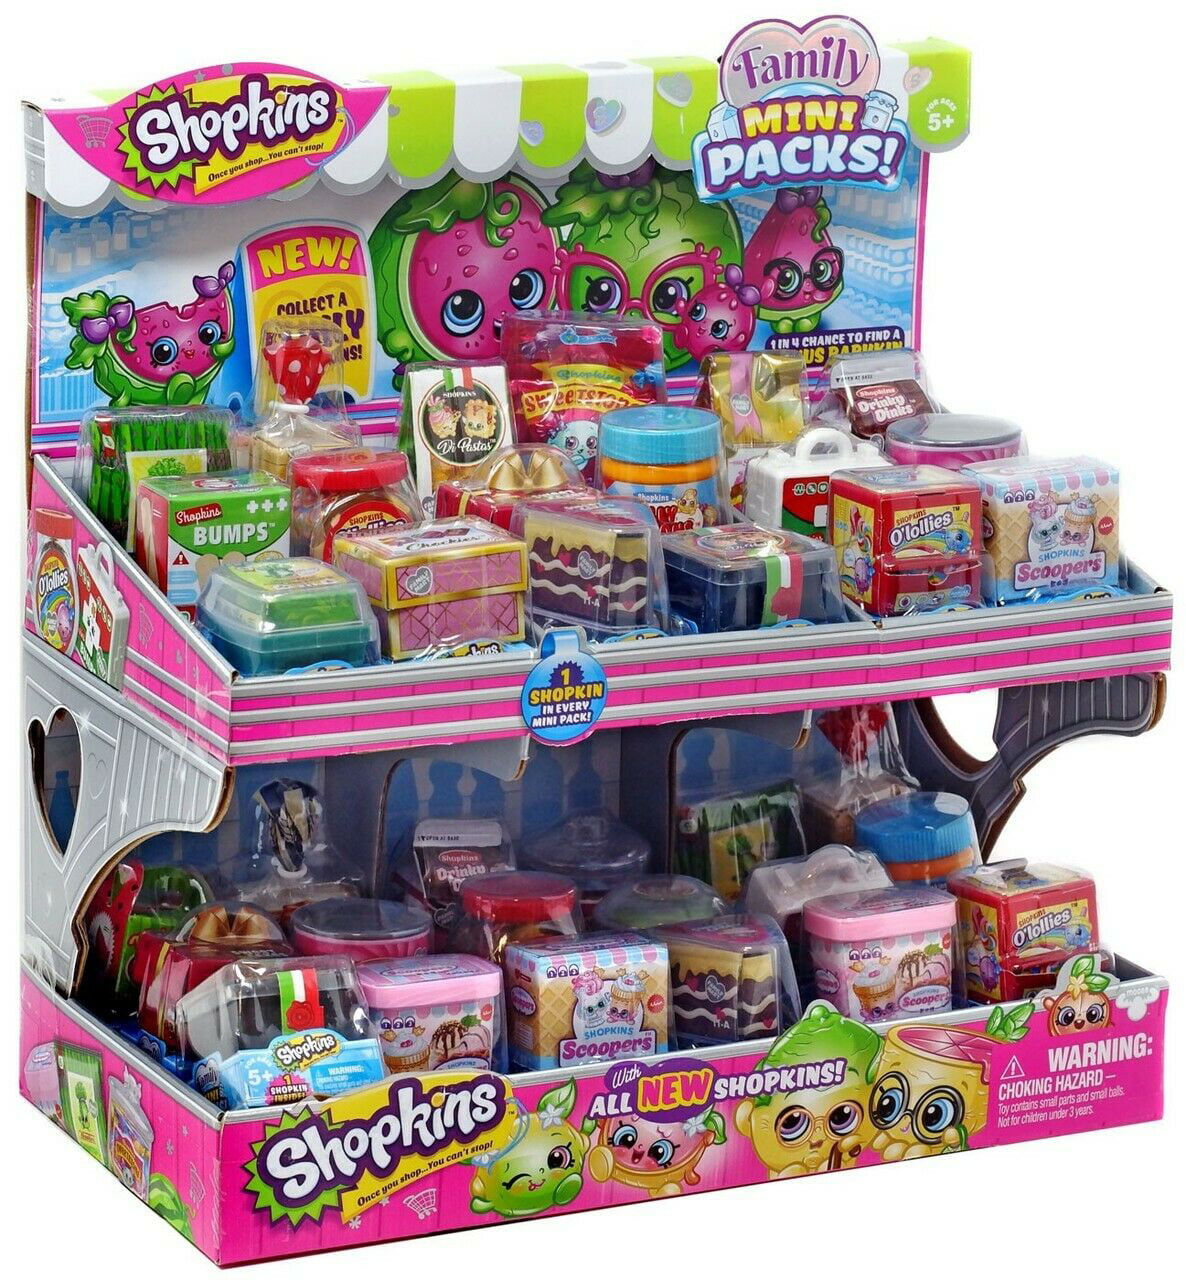 Shopkins 32 Pack From Series 5 & 7-16 Packs of 2 Shopkins 6 